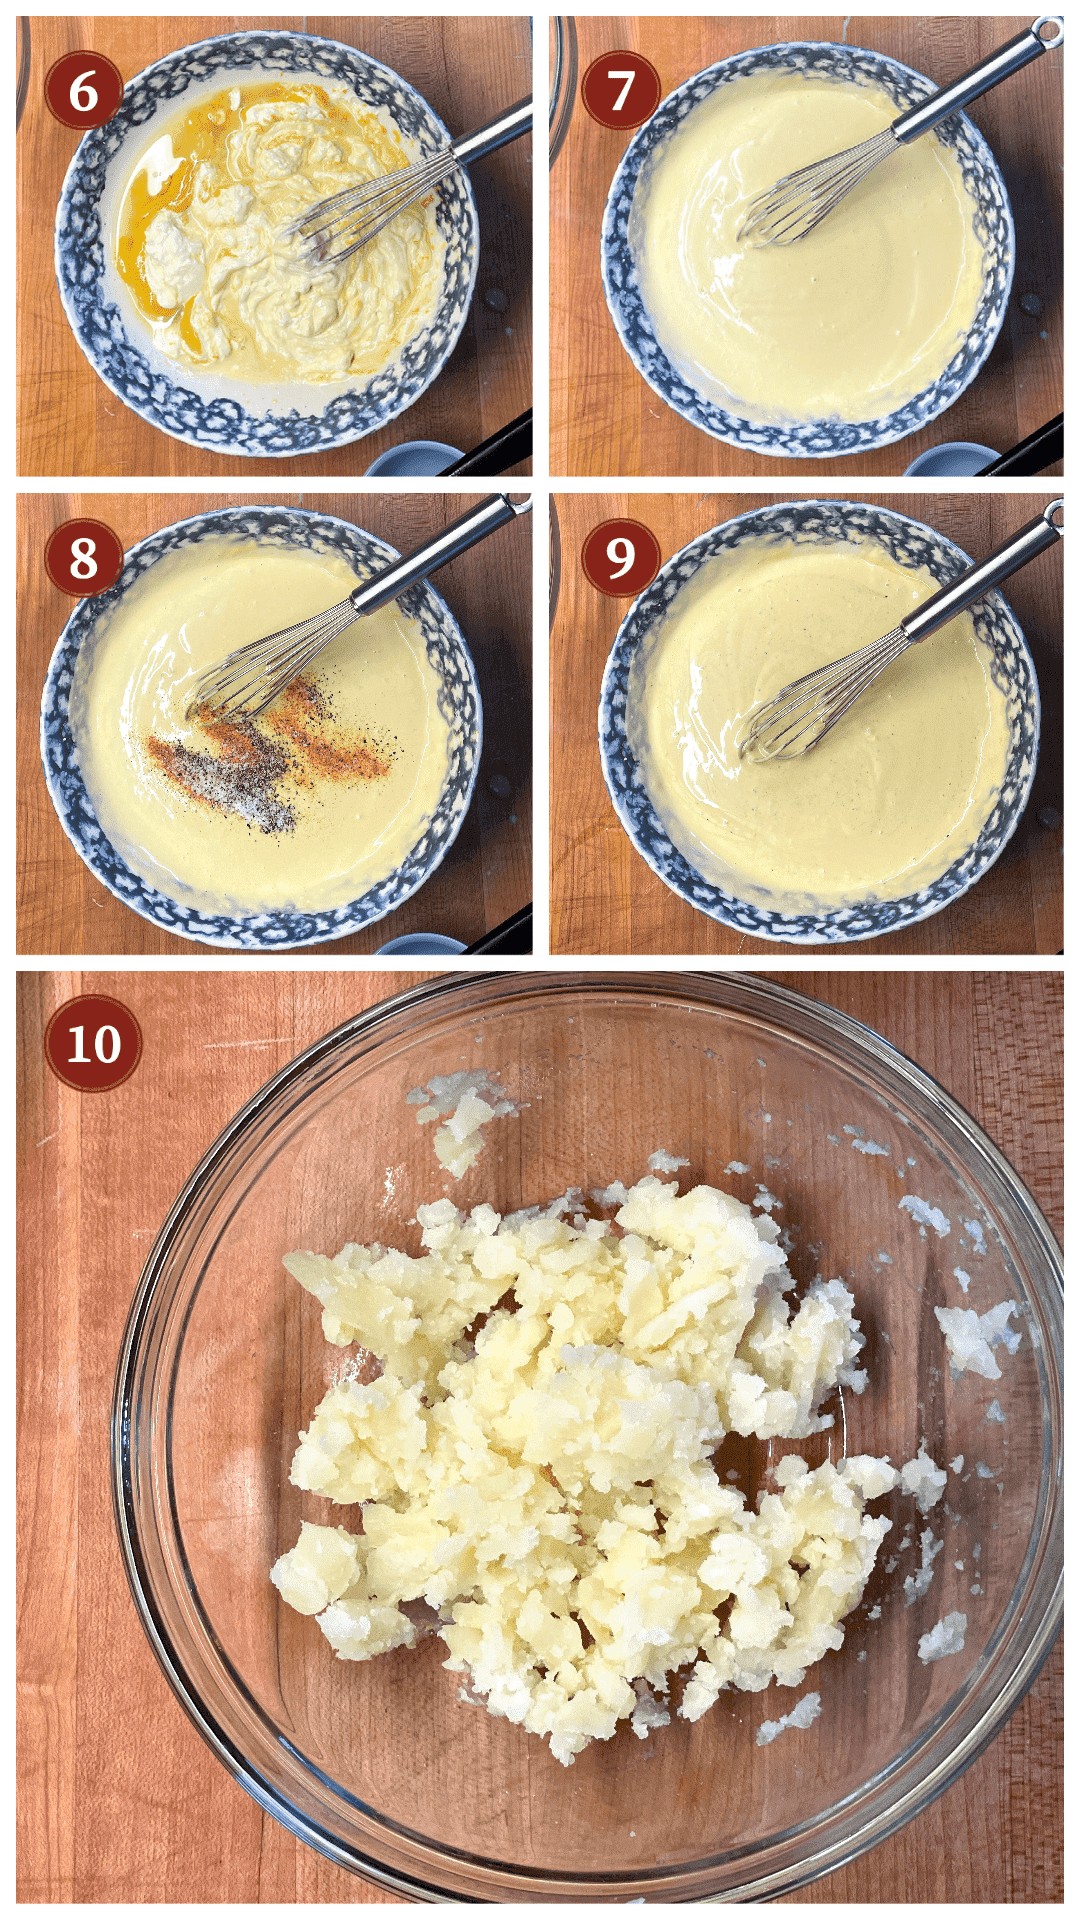 A collage of images showing how to make dressing for potato salad, steps 6 - 10.